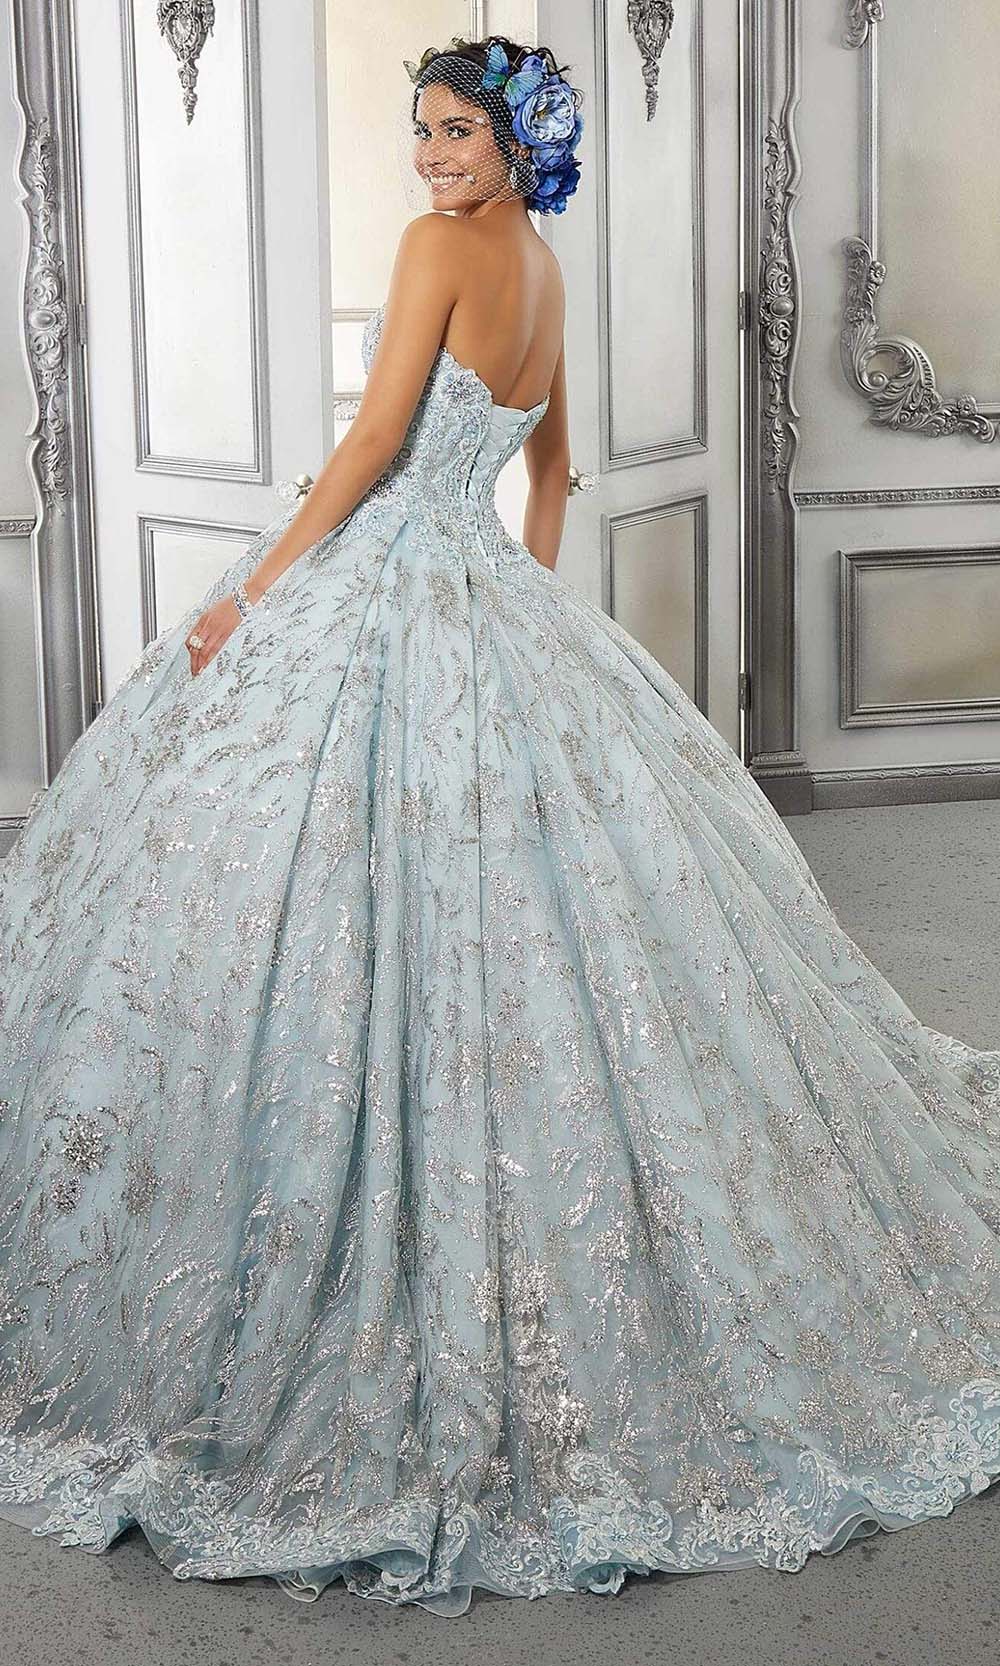 Champagne Lace Tiered Sky Blue Princess Evening Gown For Girls Perfect For  Pageants, Weddings, Proms, And Special Occasions With Sweep Train From  Newdeve, $119.08 | DHgate.Com